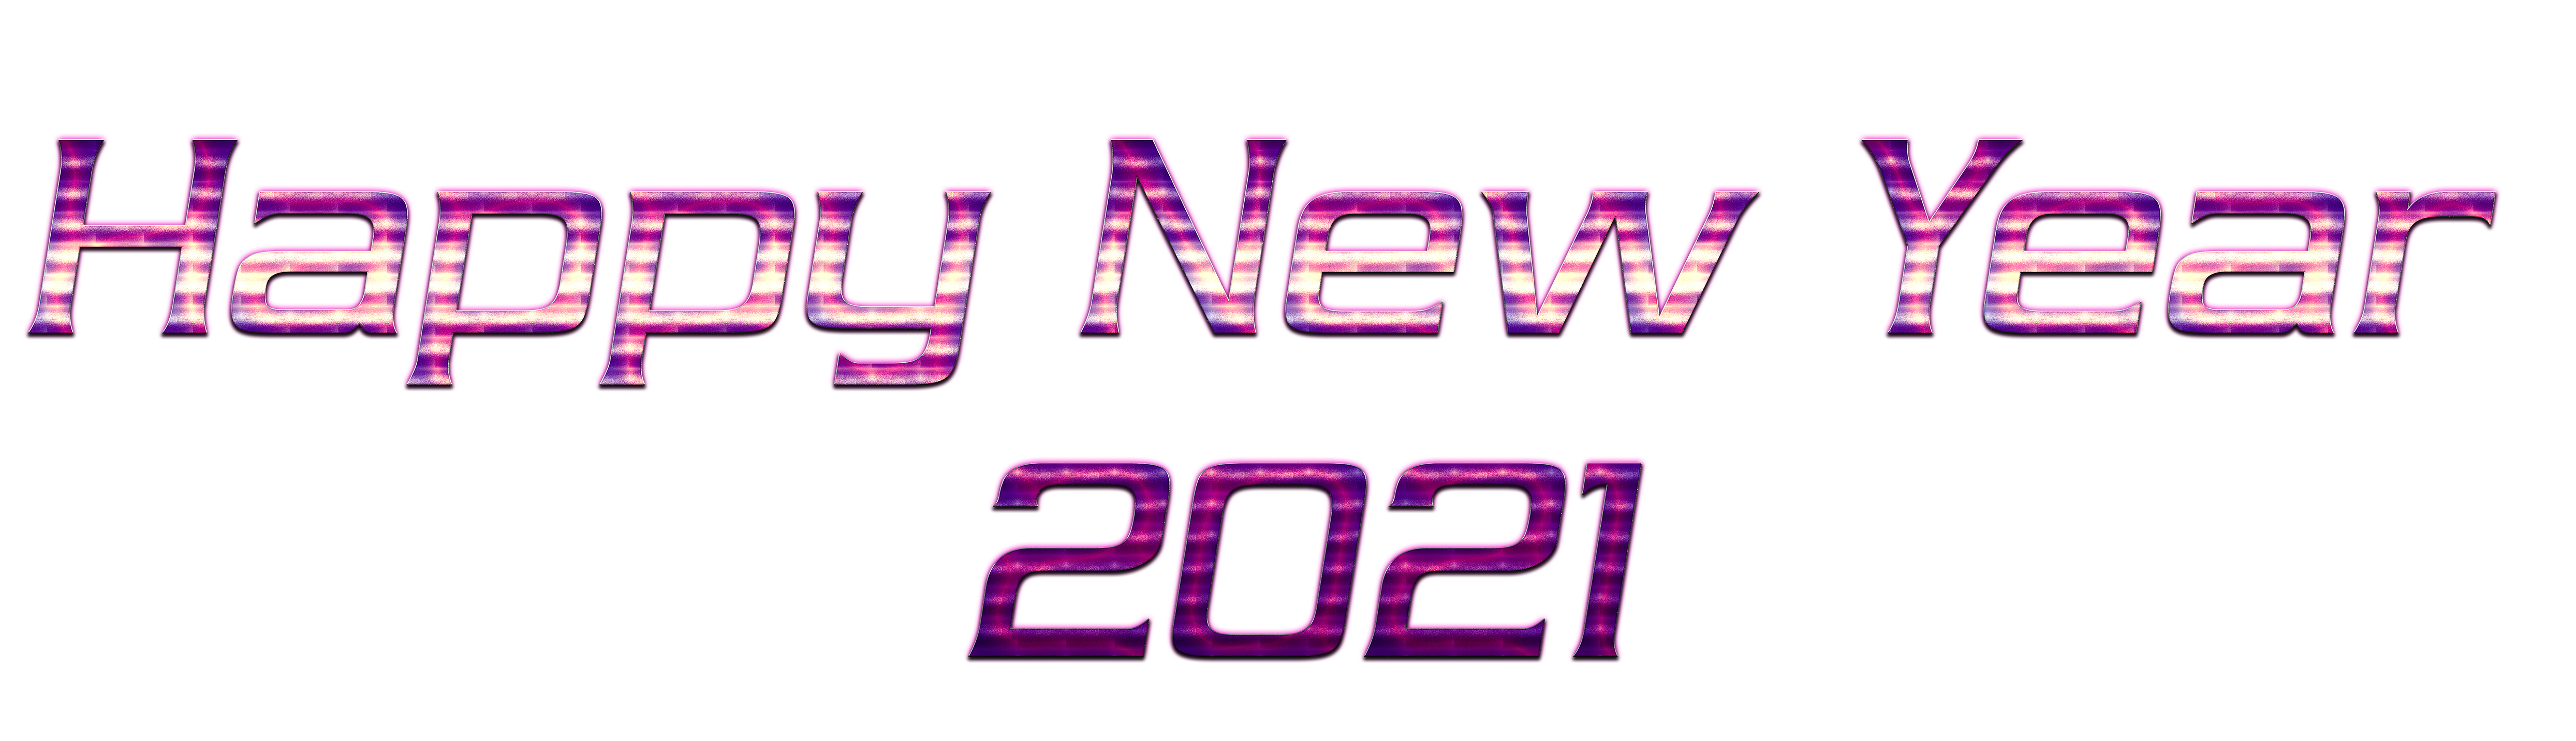 Happy New Year 2021 PNG Image